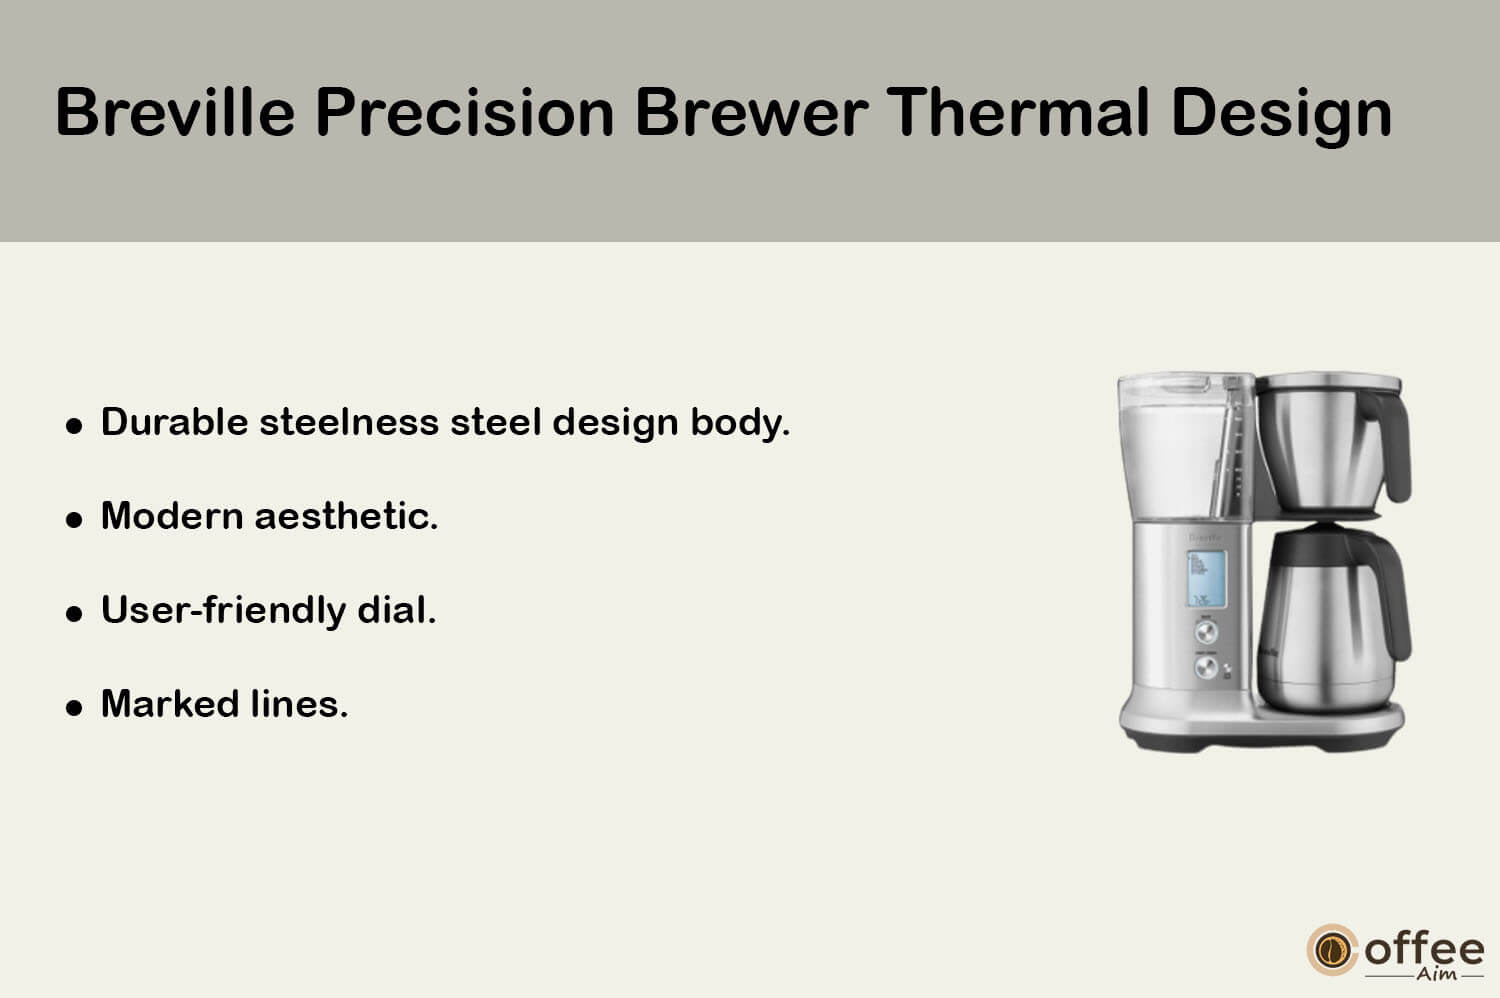 "This image showcases the design of the 'Breville Precision Brewer Thermal' for our in-depth article titled 'Breville Precision Brewer Thermal Review'."